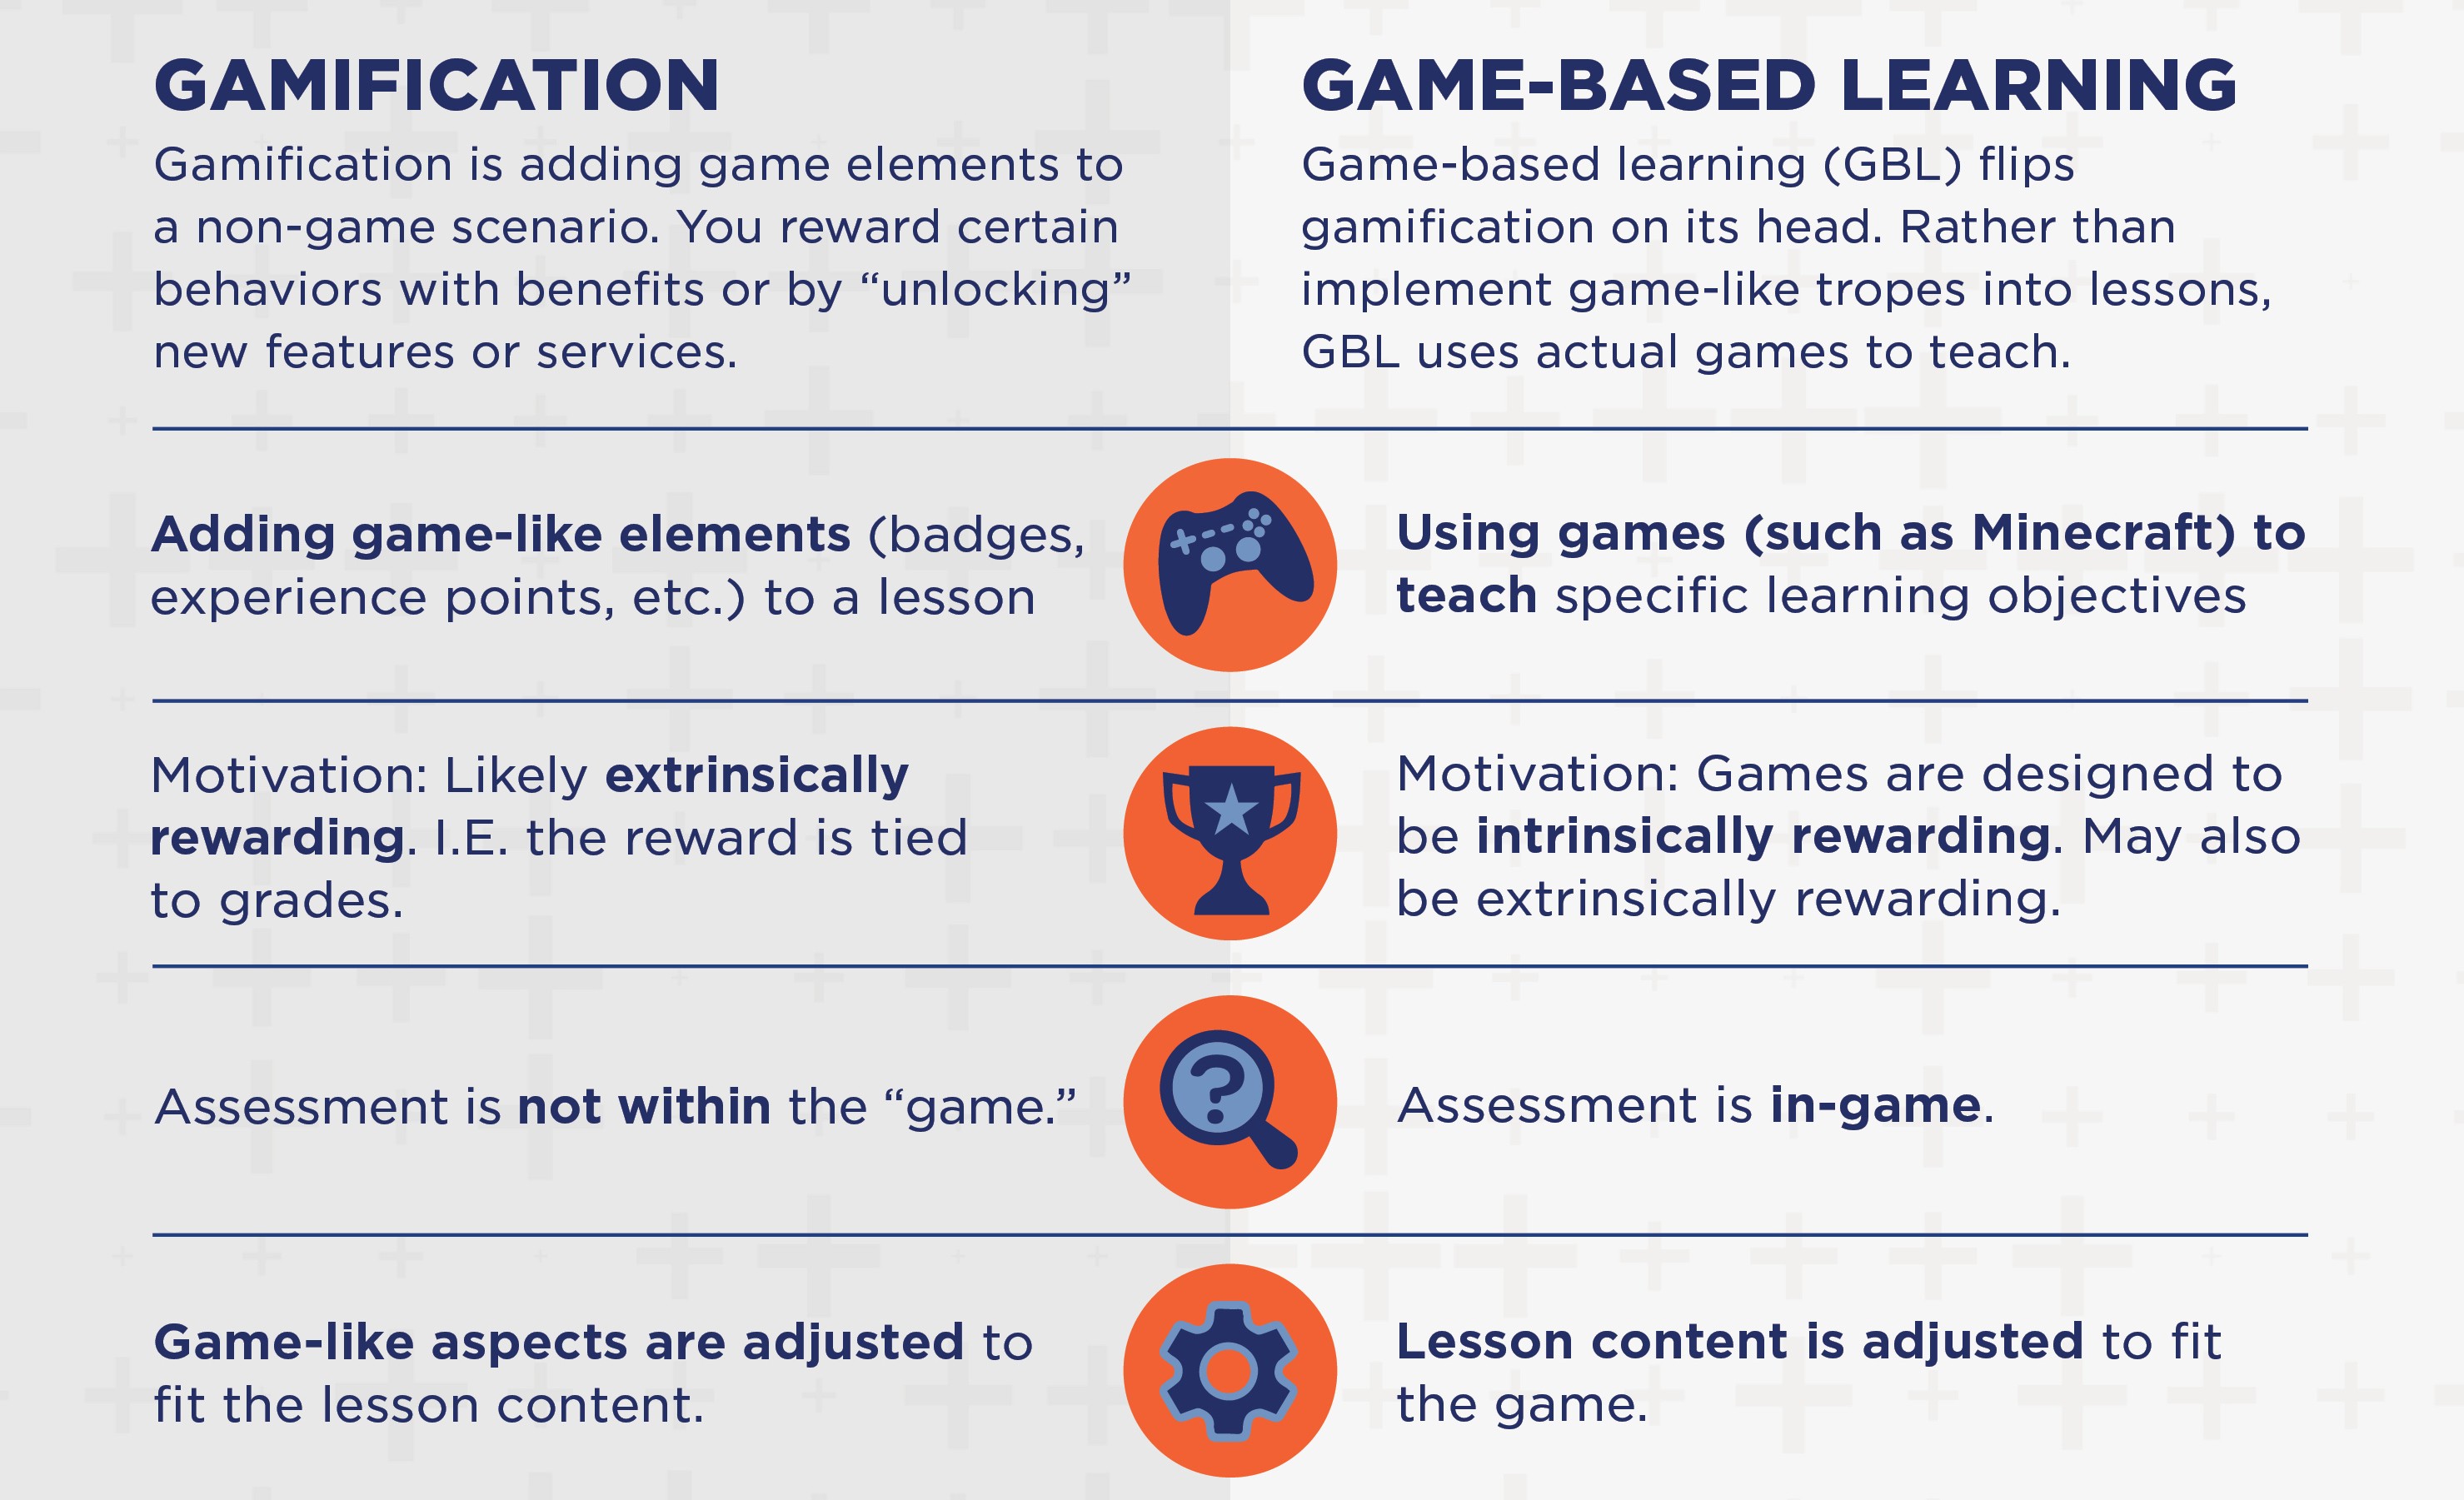 An infographic published by EdSurge outlining the differences between gamification and game-based learning.